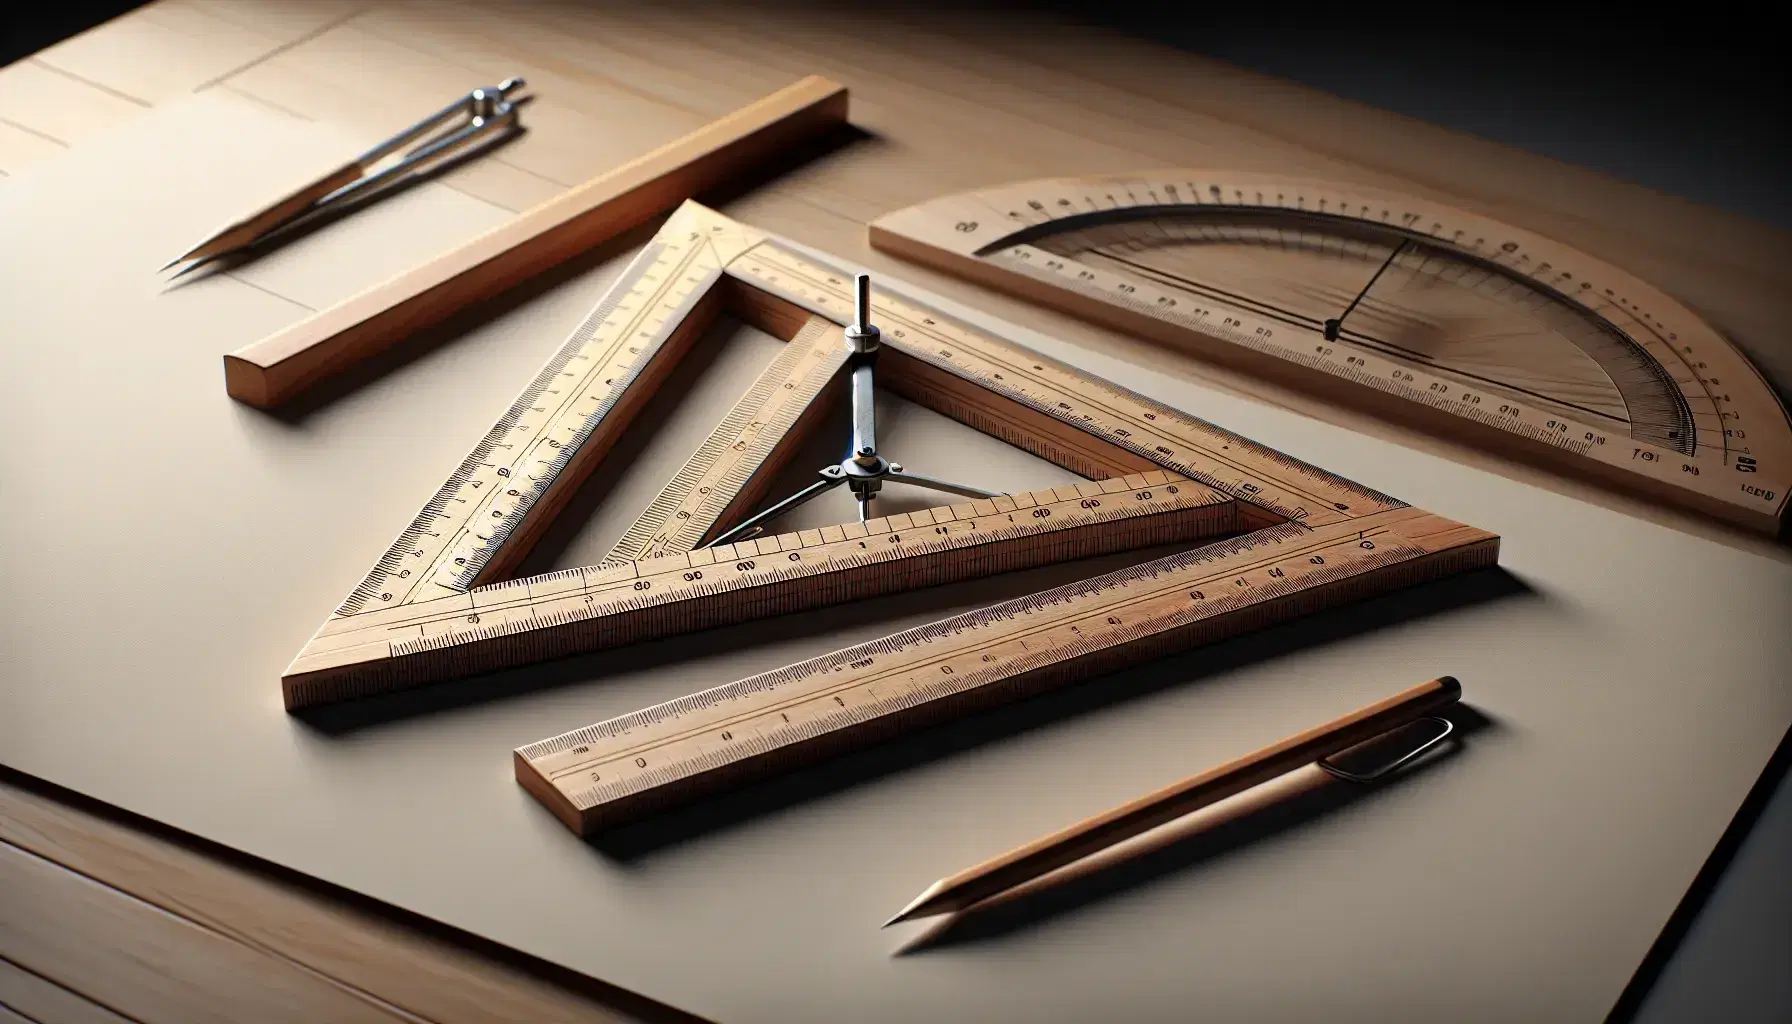 Right-angled triangle formed by three wooden rulers on a desk, with a clear protractor and a compass set for drawing, casting soft shadows.